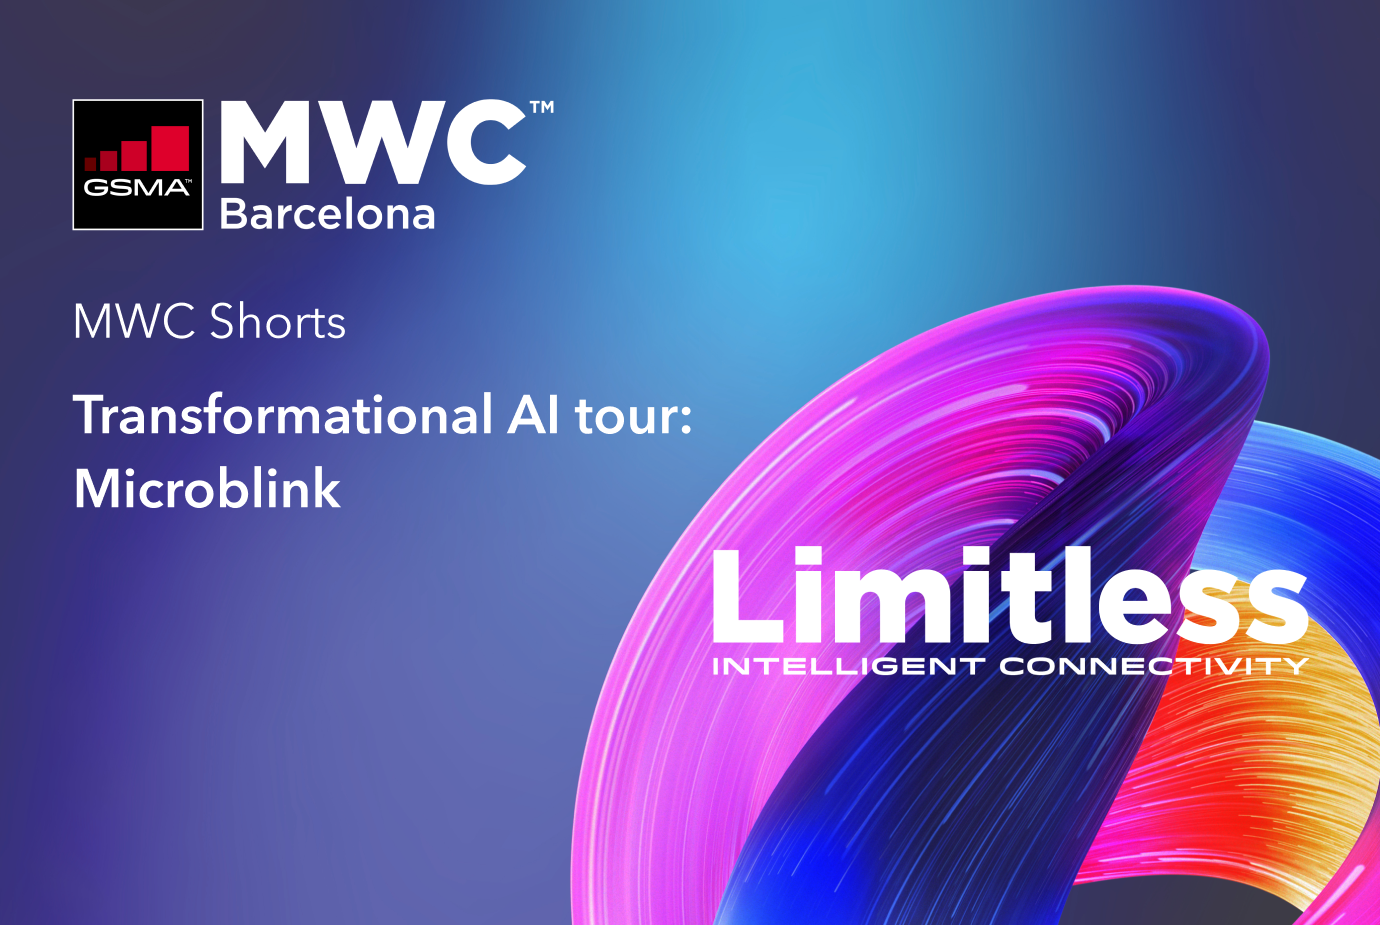 VIDEO: Our MWC Barcelona 2020 Short is live